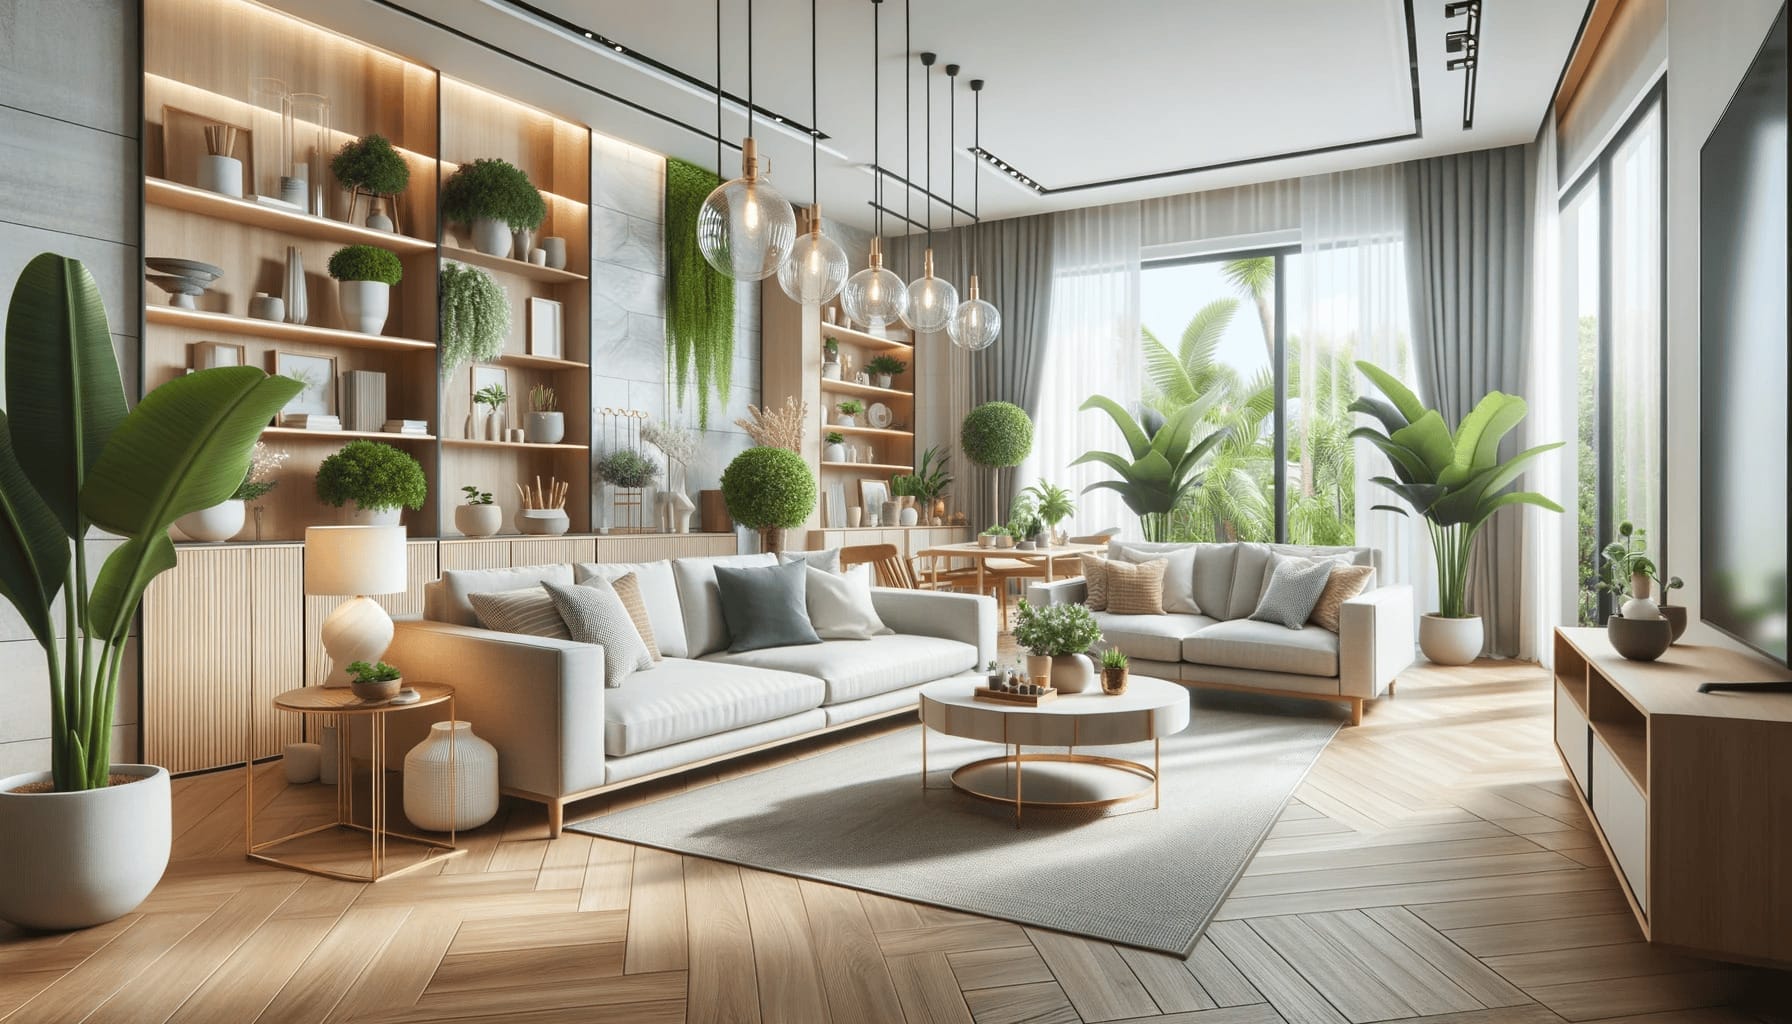 DALL·E 2023 10 17 12.22.14 Photo of a beautifully renovated living room with modern furniture natural lighting and indoor plants representing a successful DIY home improvemen